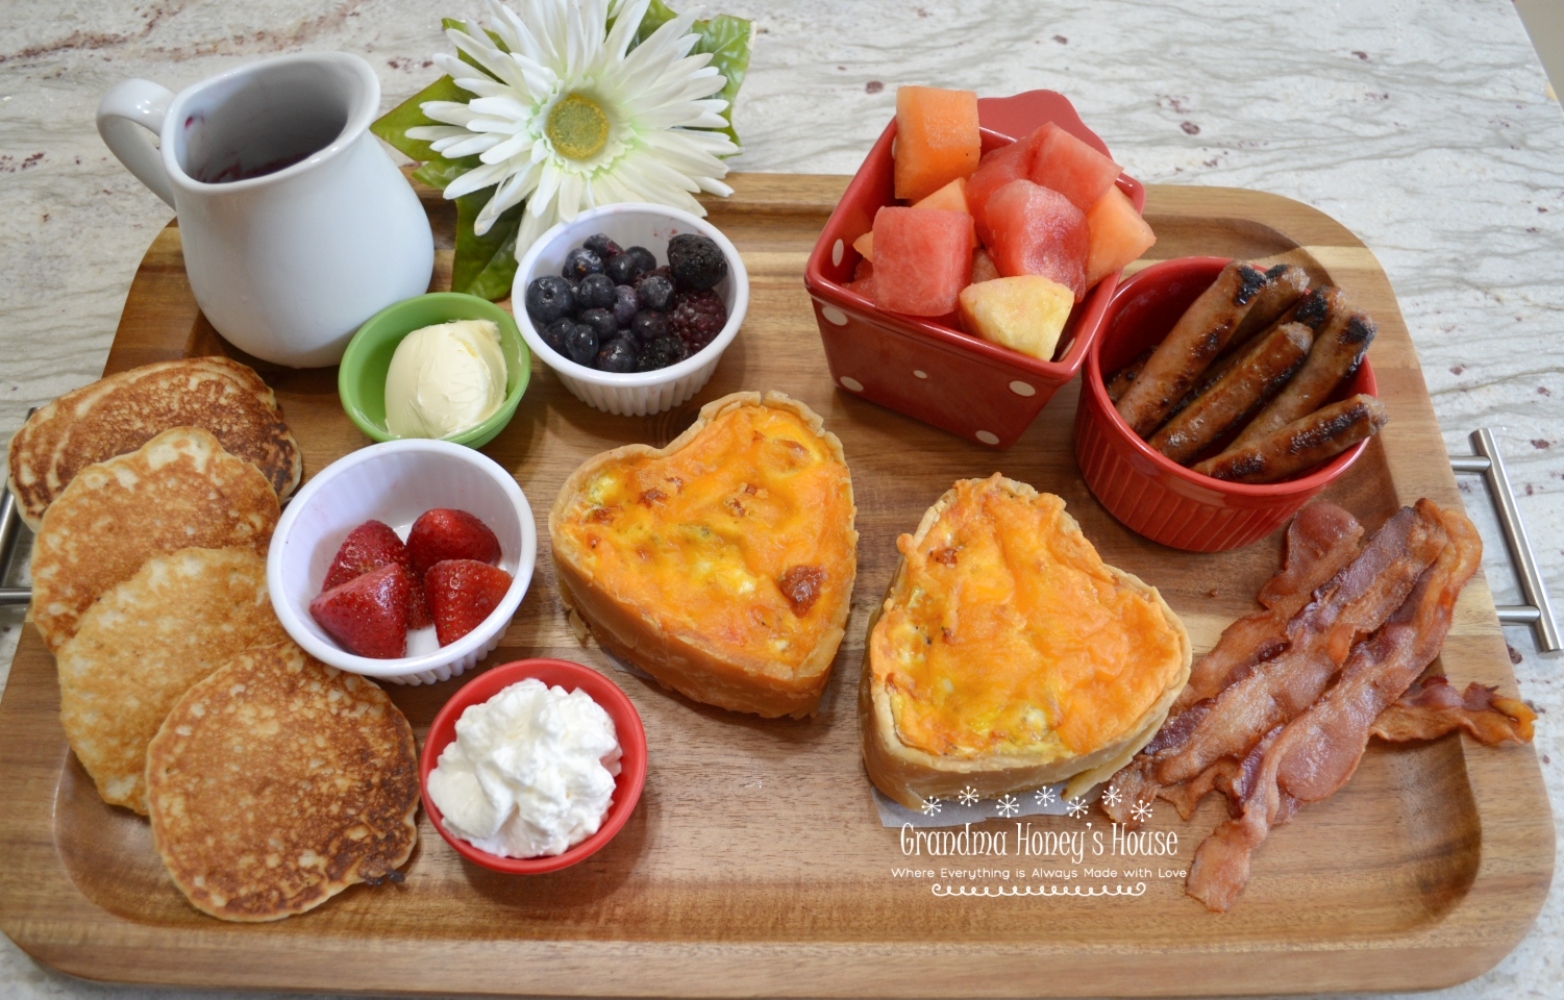 Valentine's Day Mini Breakfast Quiche and other foods create this beautiful board to share with your love.